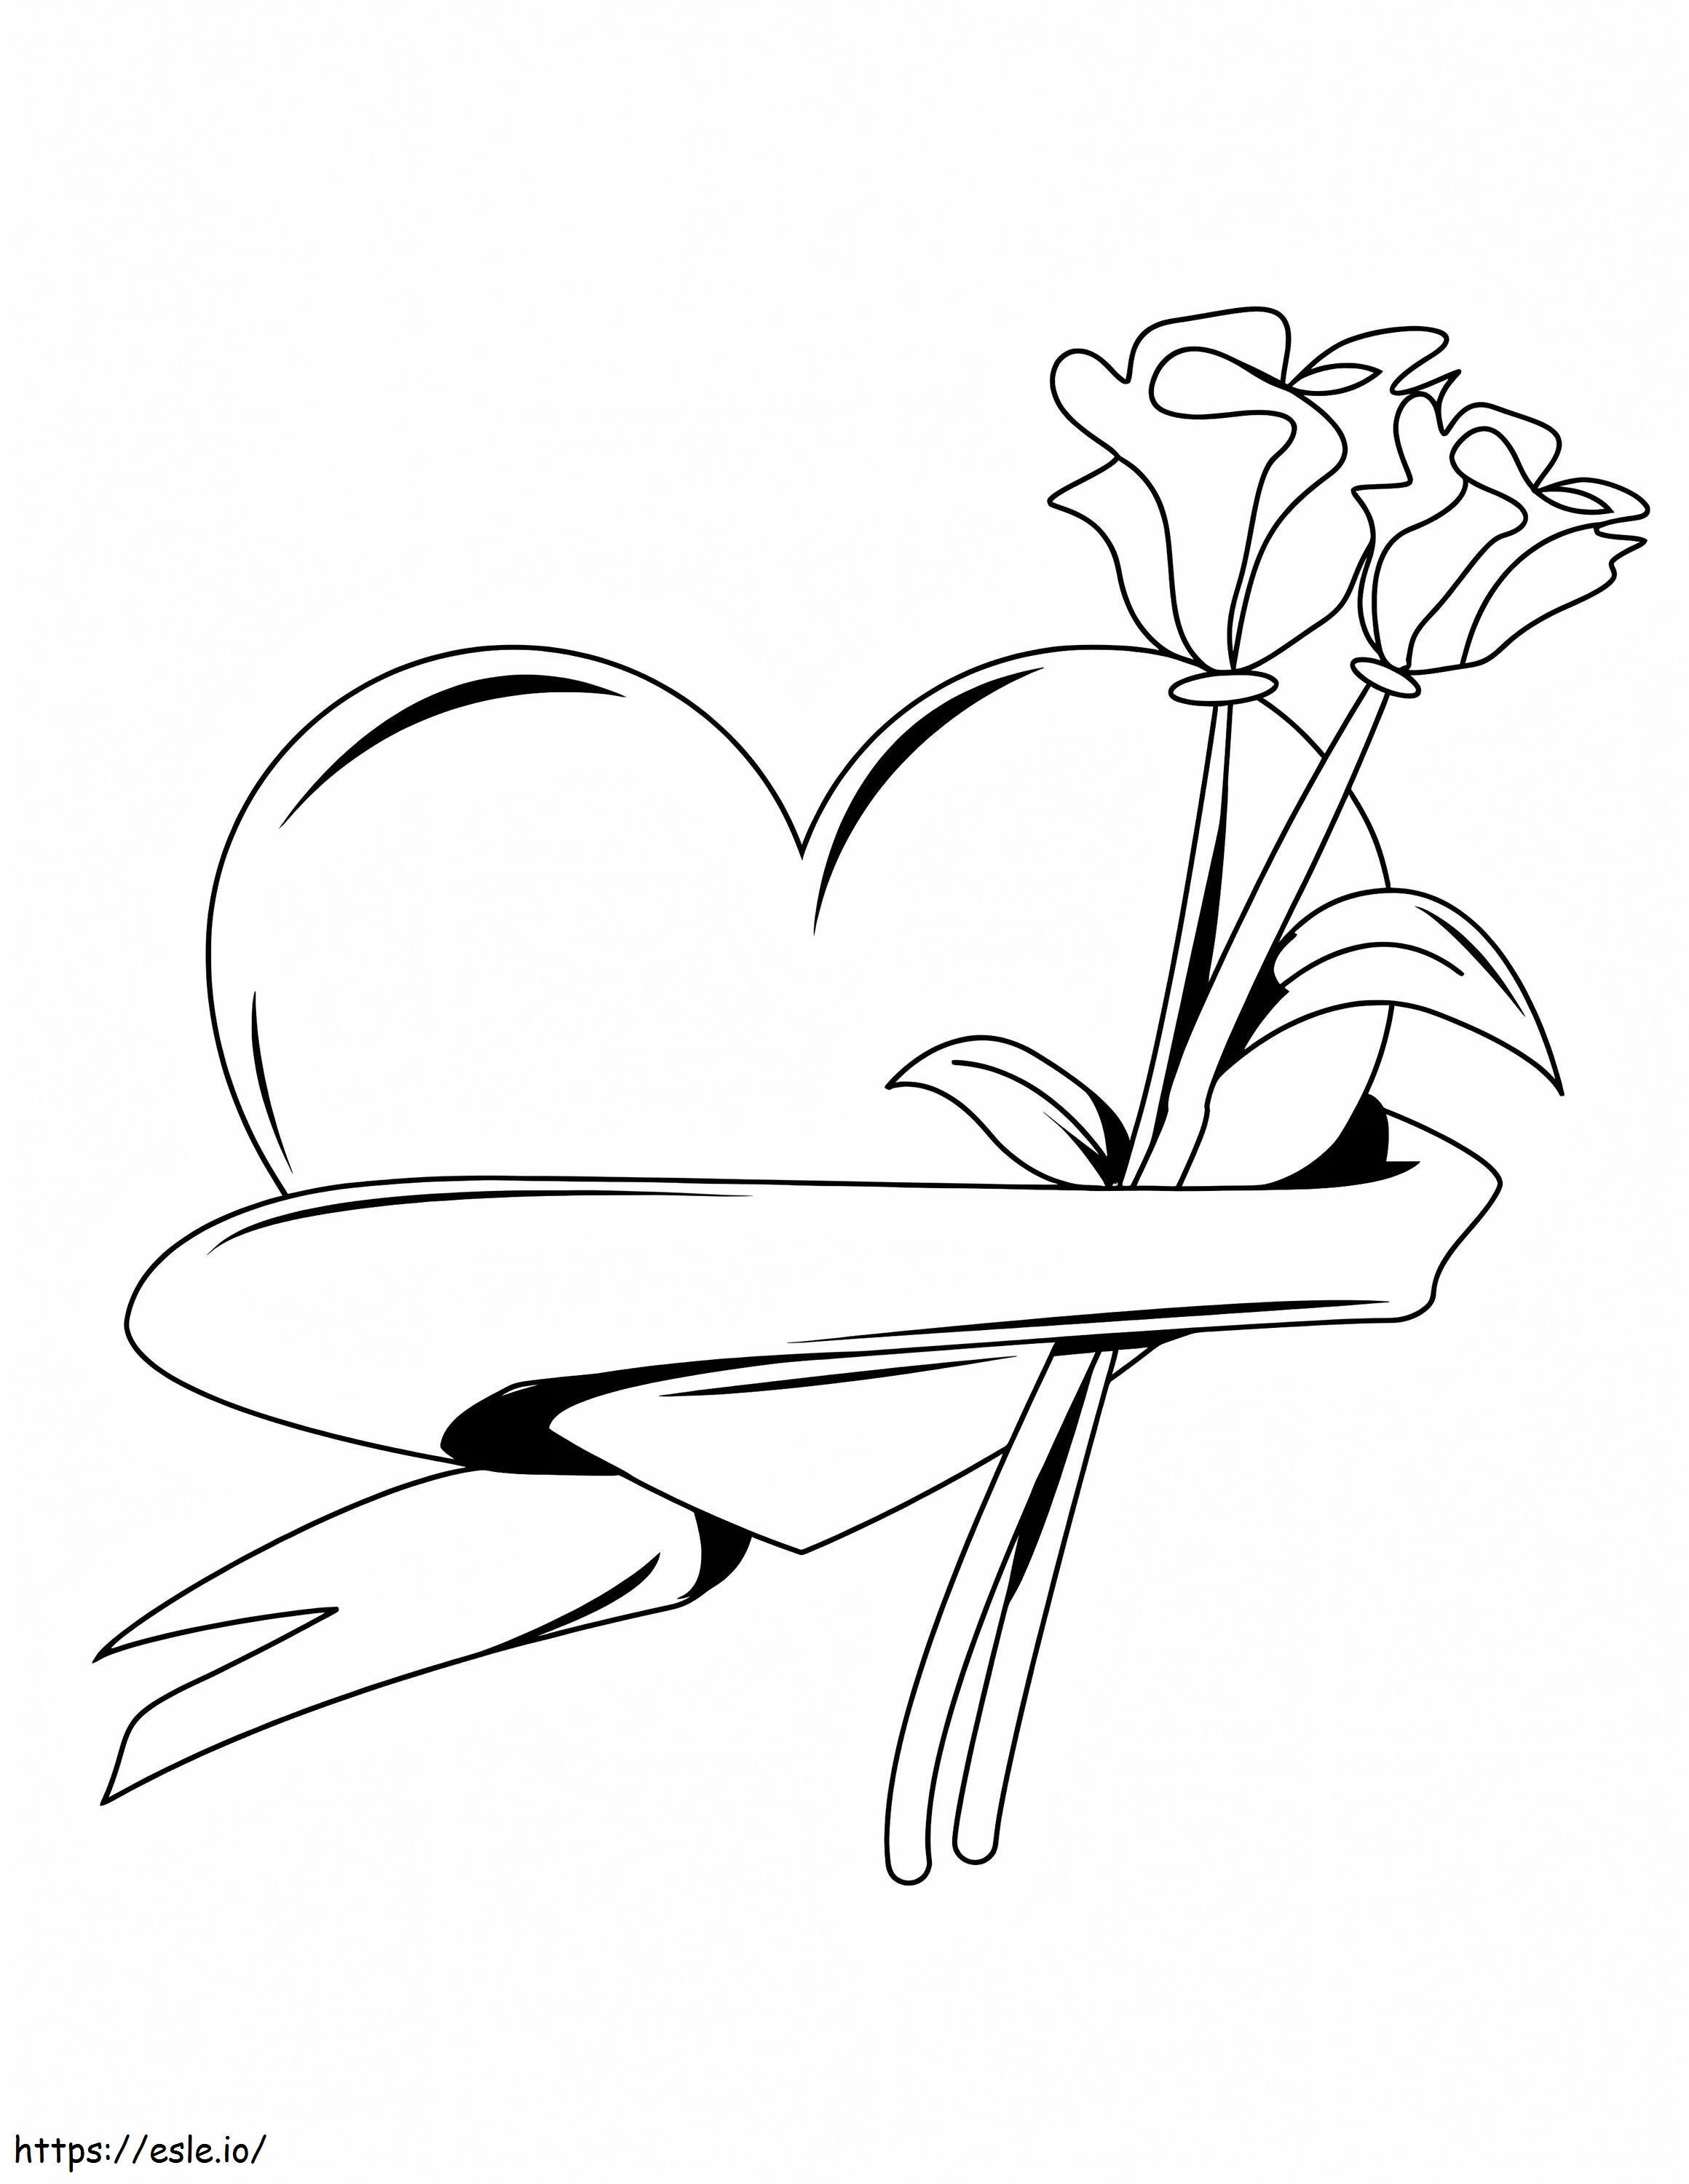 Hearts With Flowers coloring page